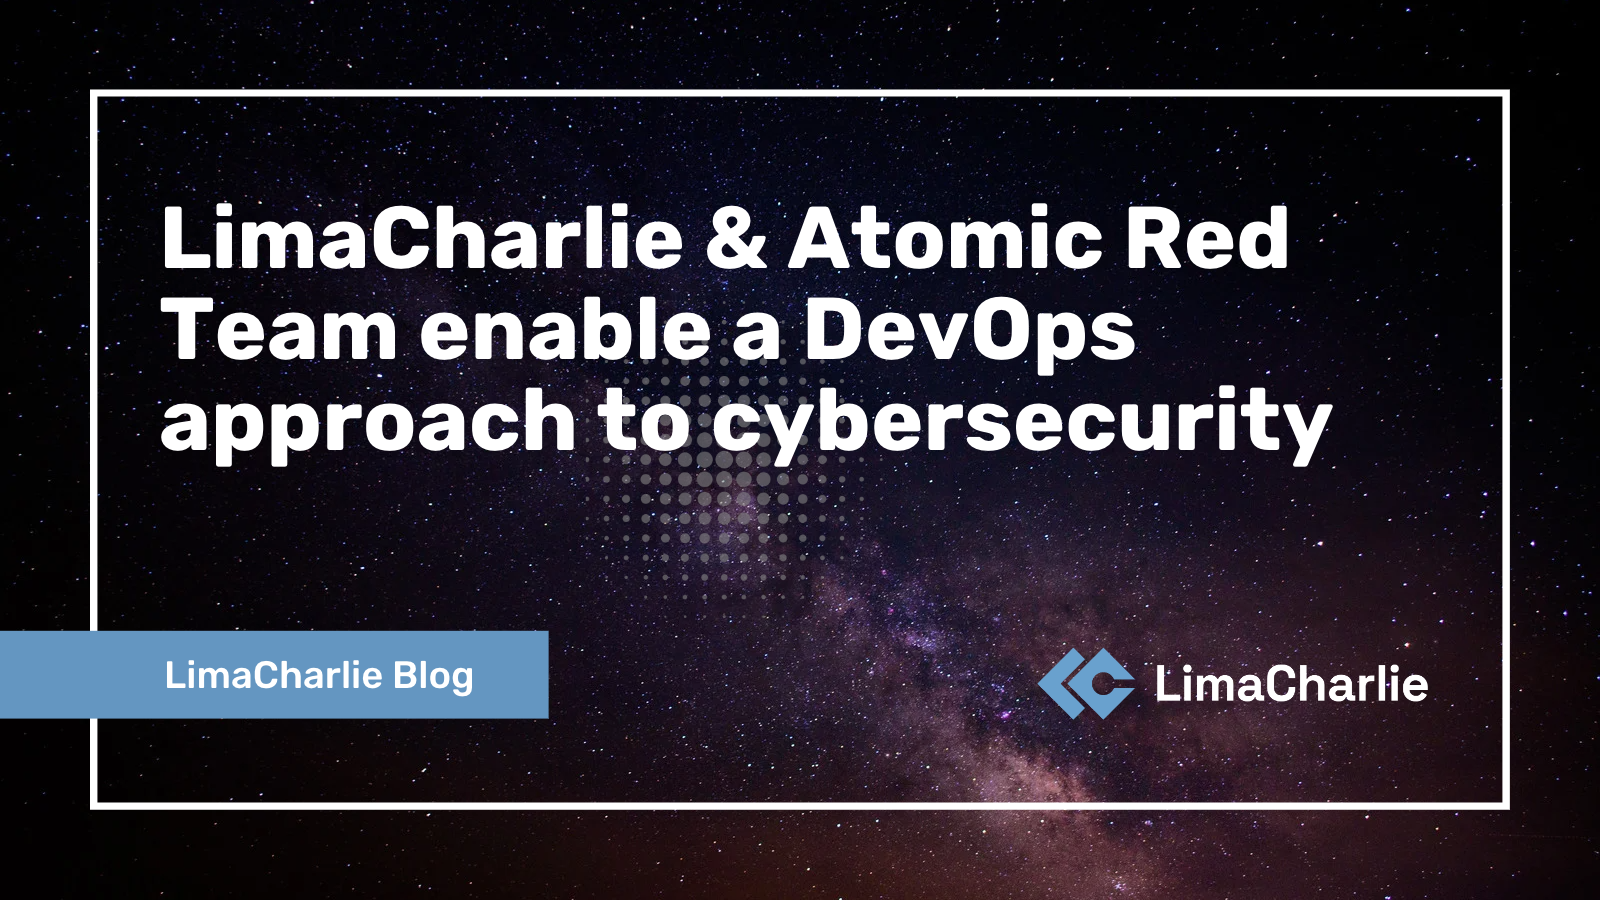 LimaCharlie & Atomic Red Team enable a DevOps approach to cybersecurity